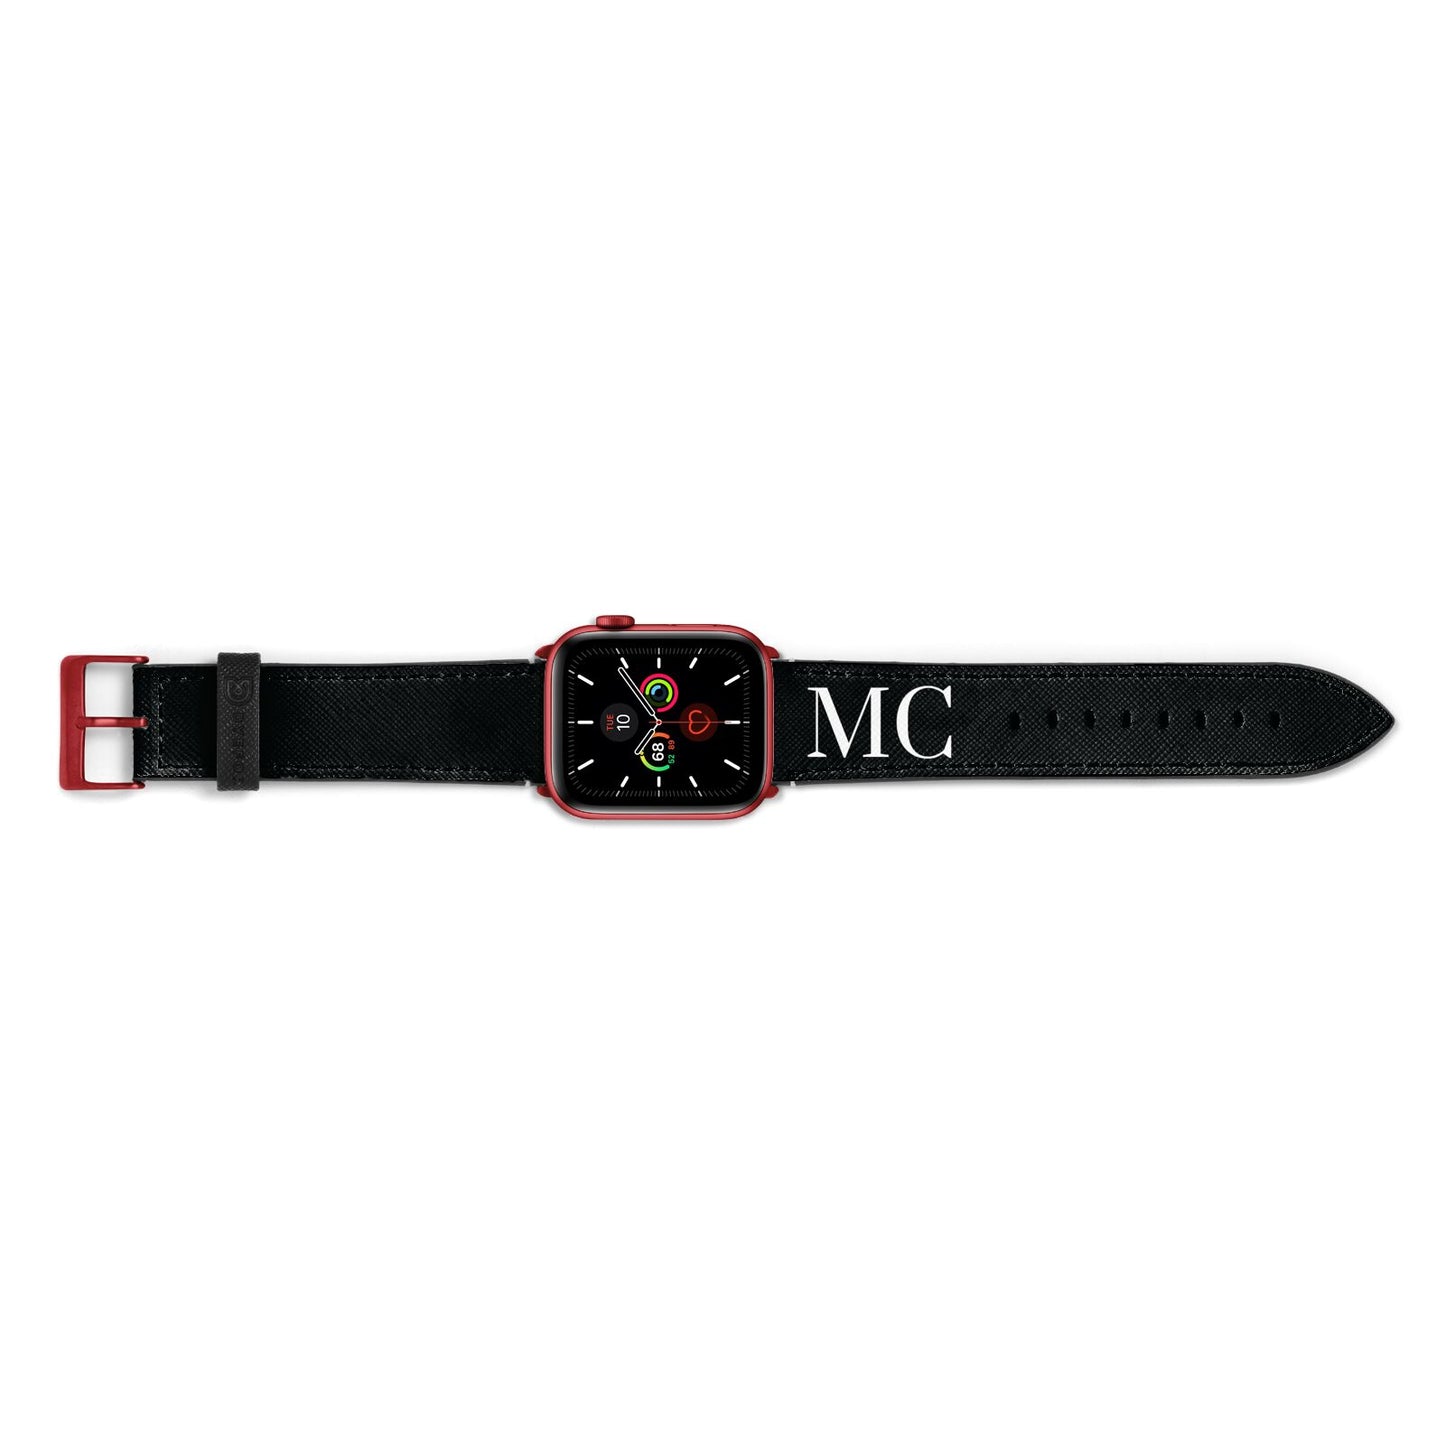 Initials Personalised 1 Apple Watch Strap Landscape Image Red Hardware